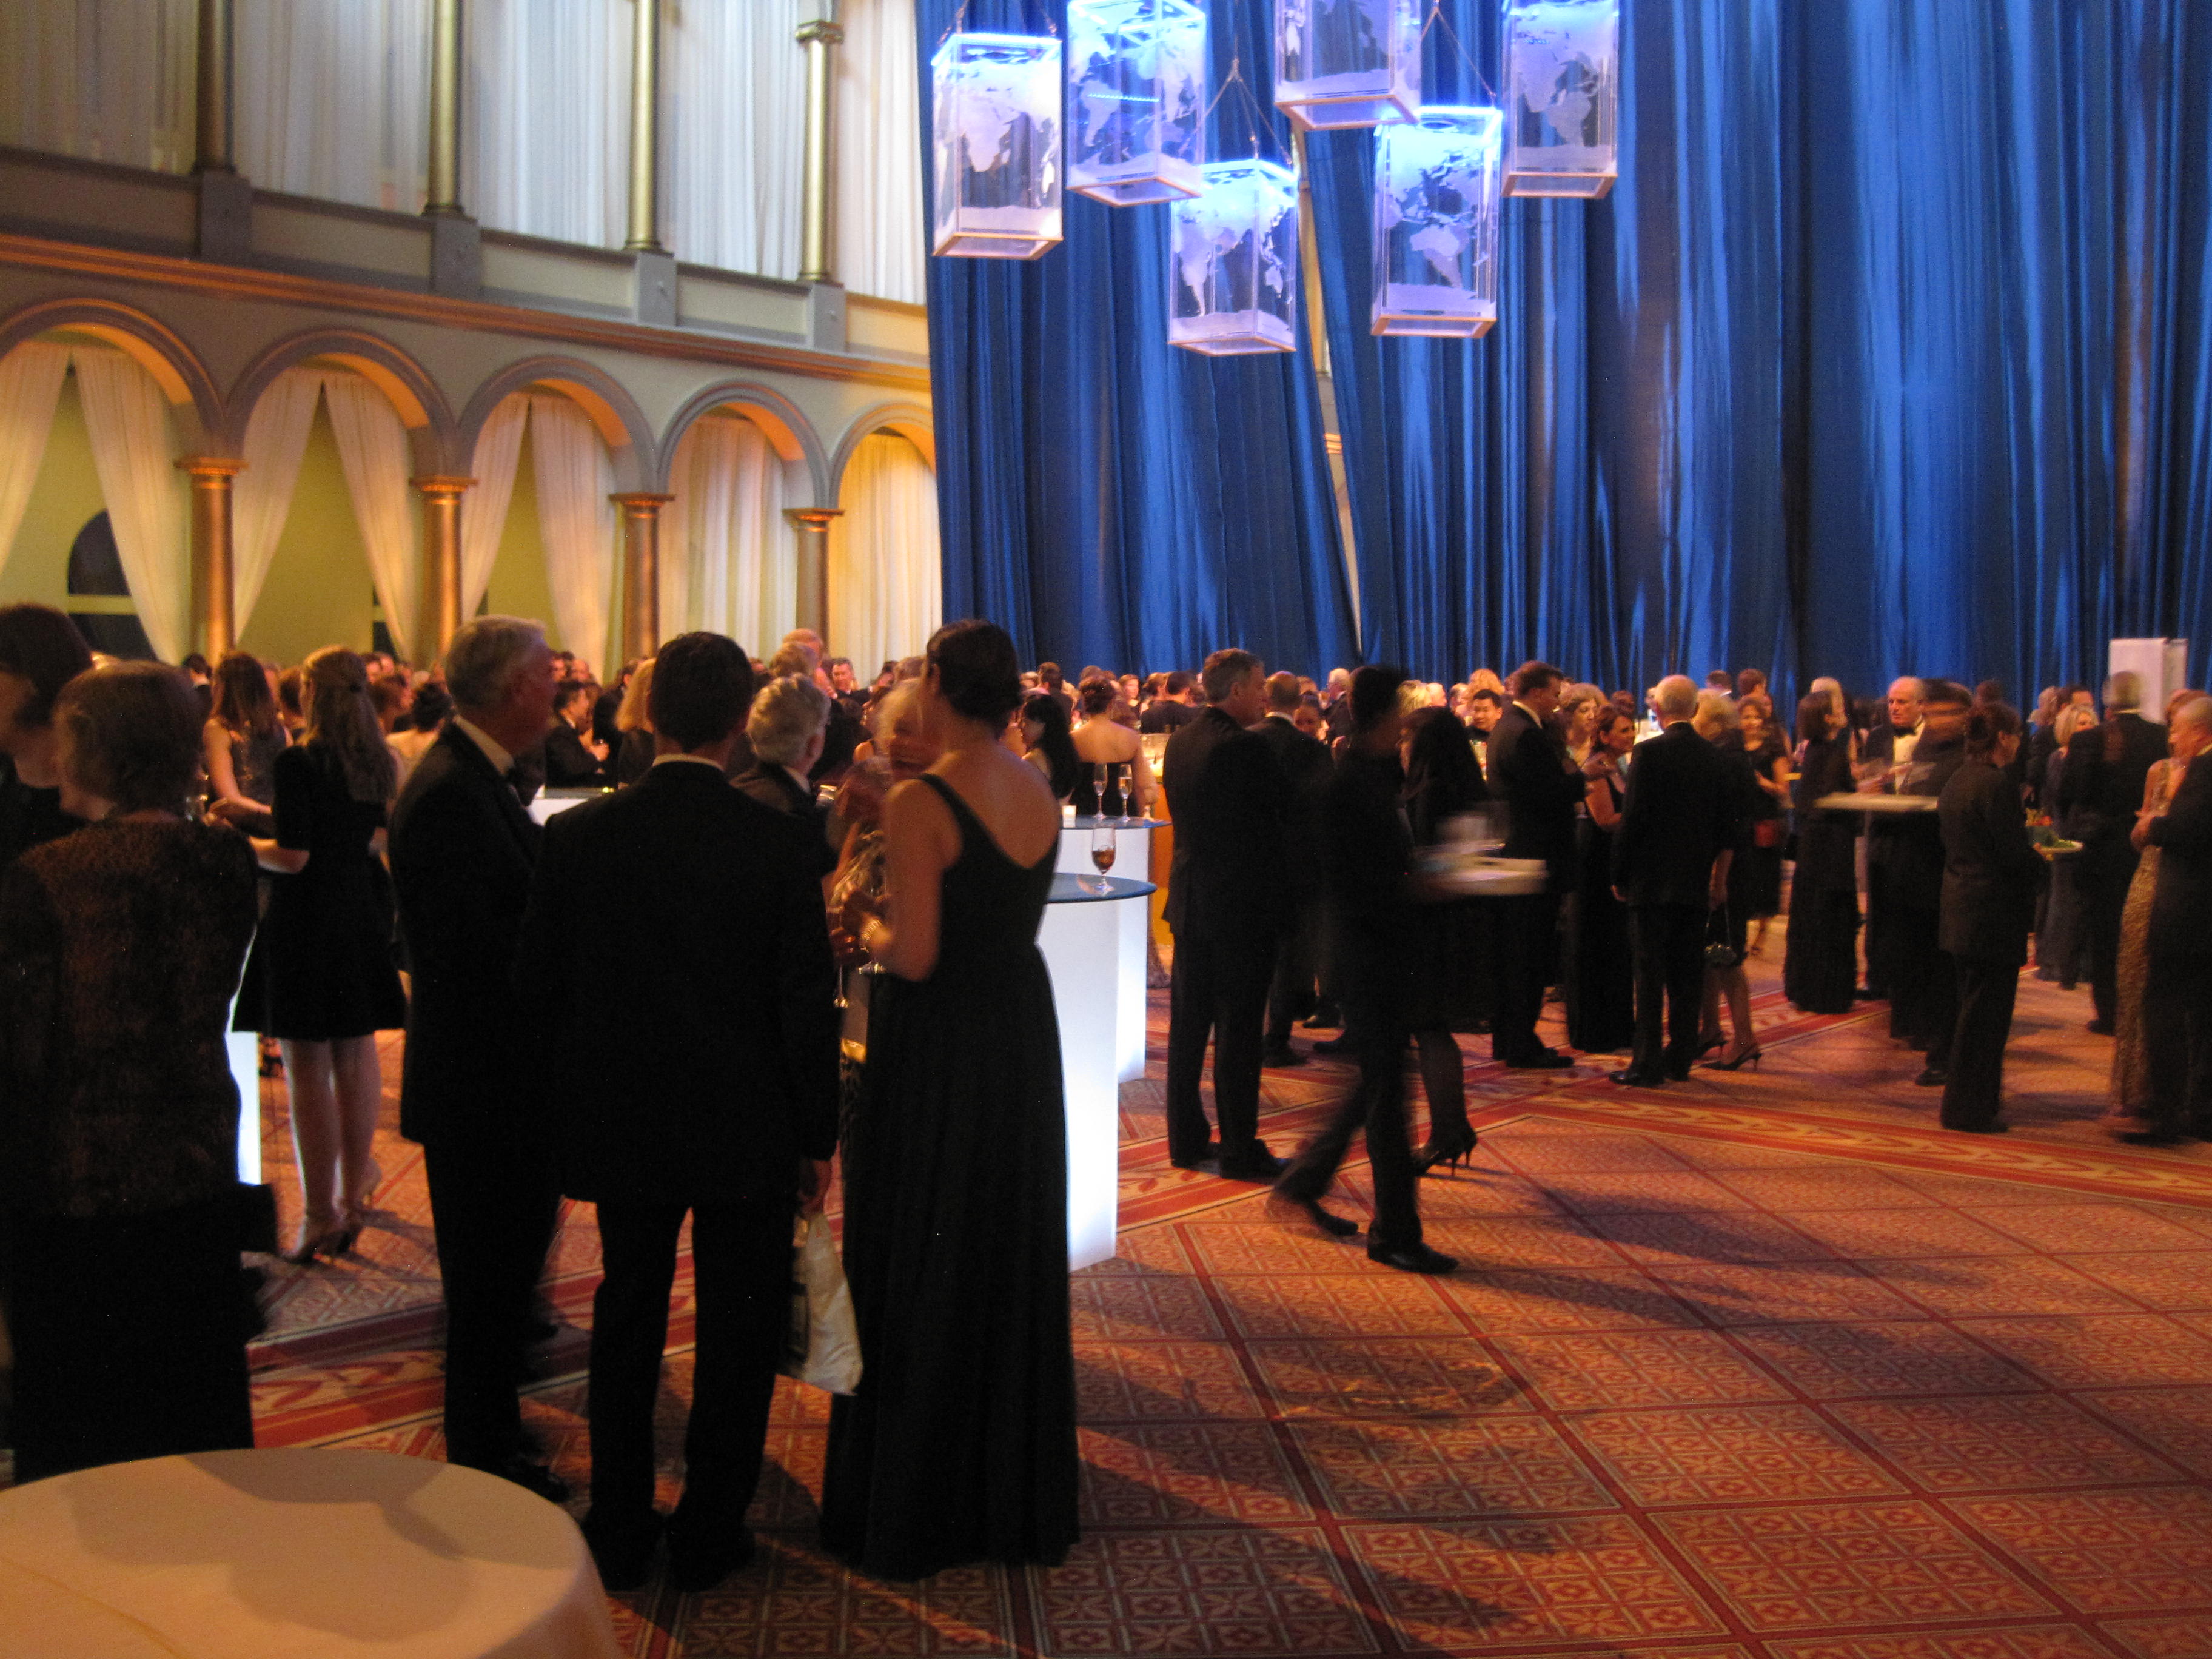 National Geographic’s 125th Anniversary Gala: Excitement & Exploration